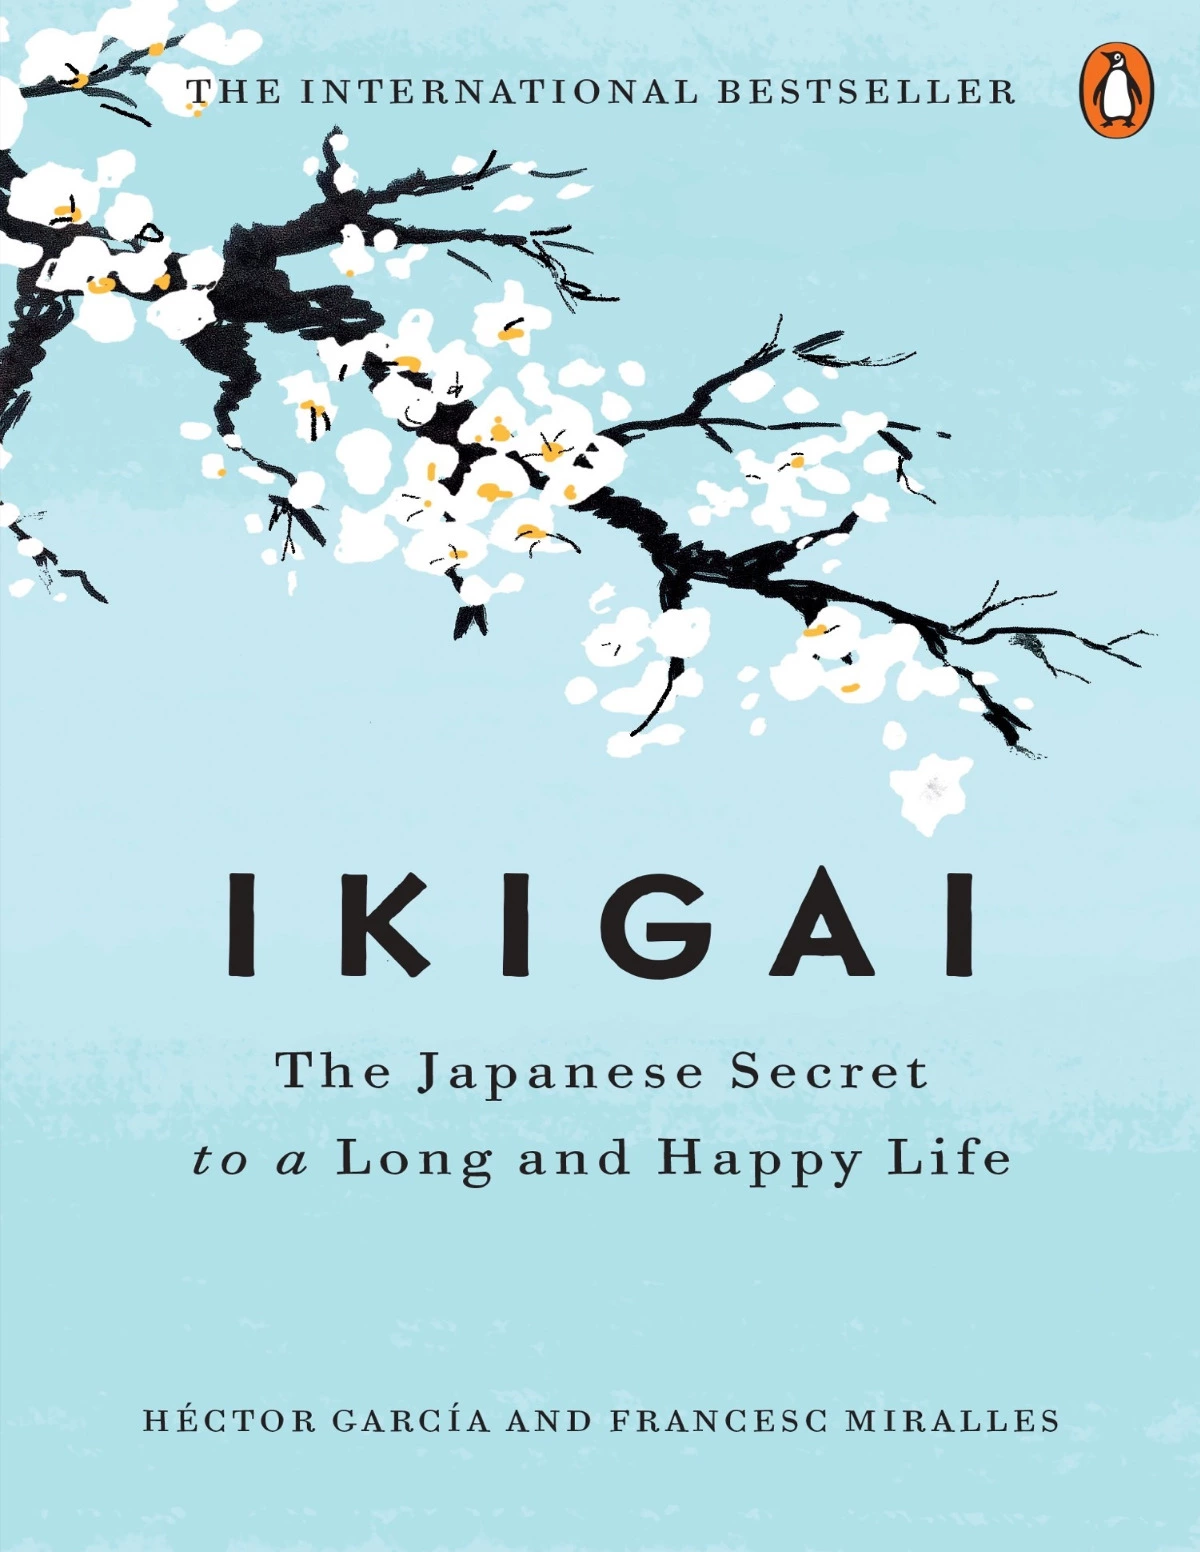 Ikigai Book by Hector Garcia and Francesc Miralles